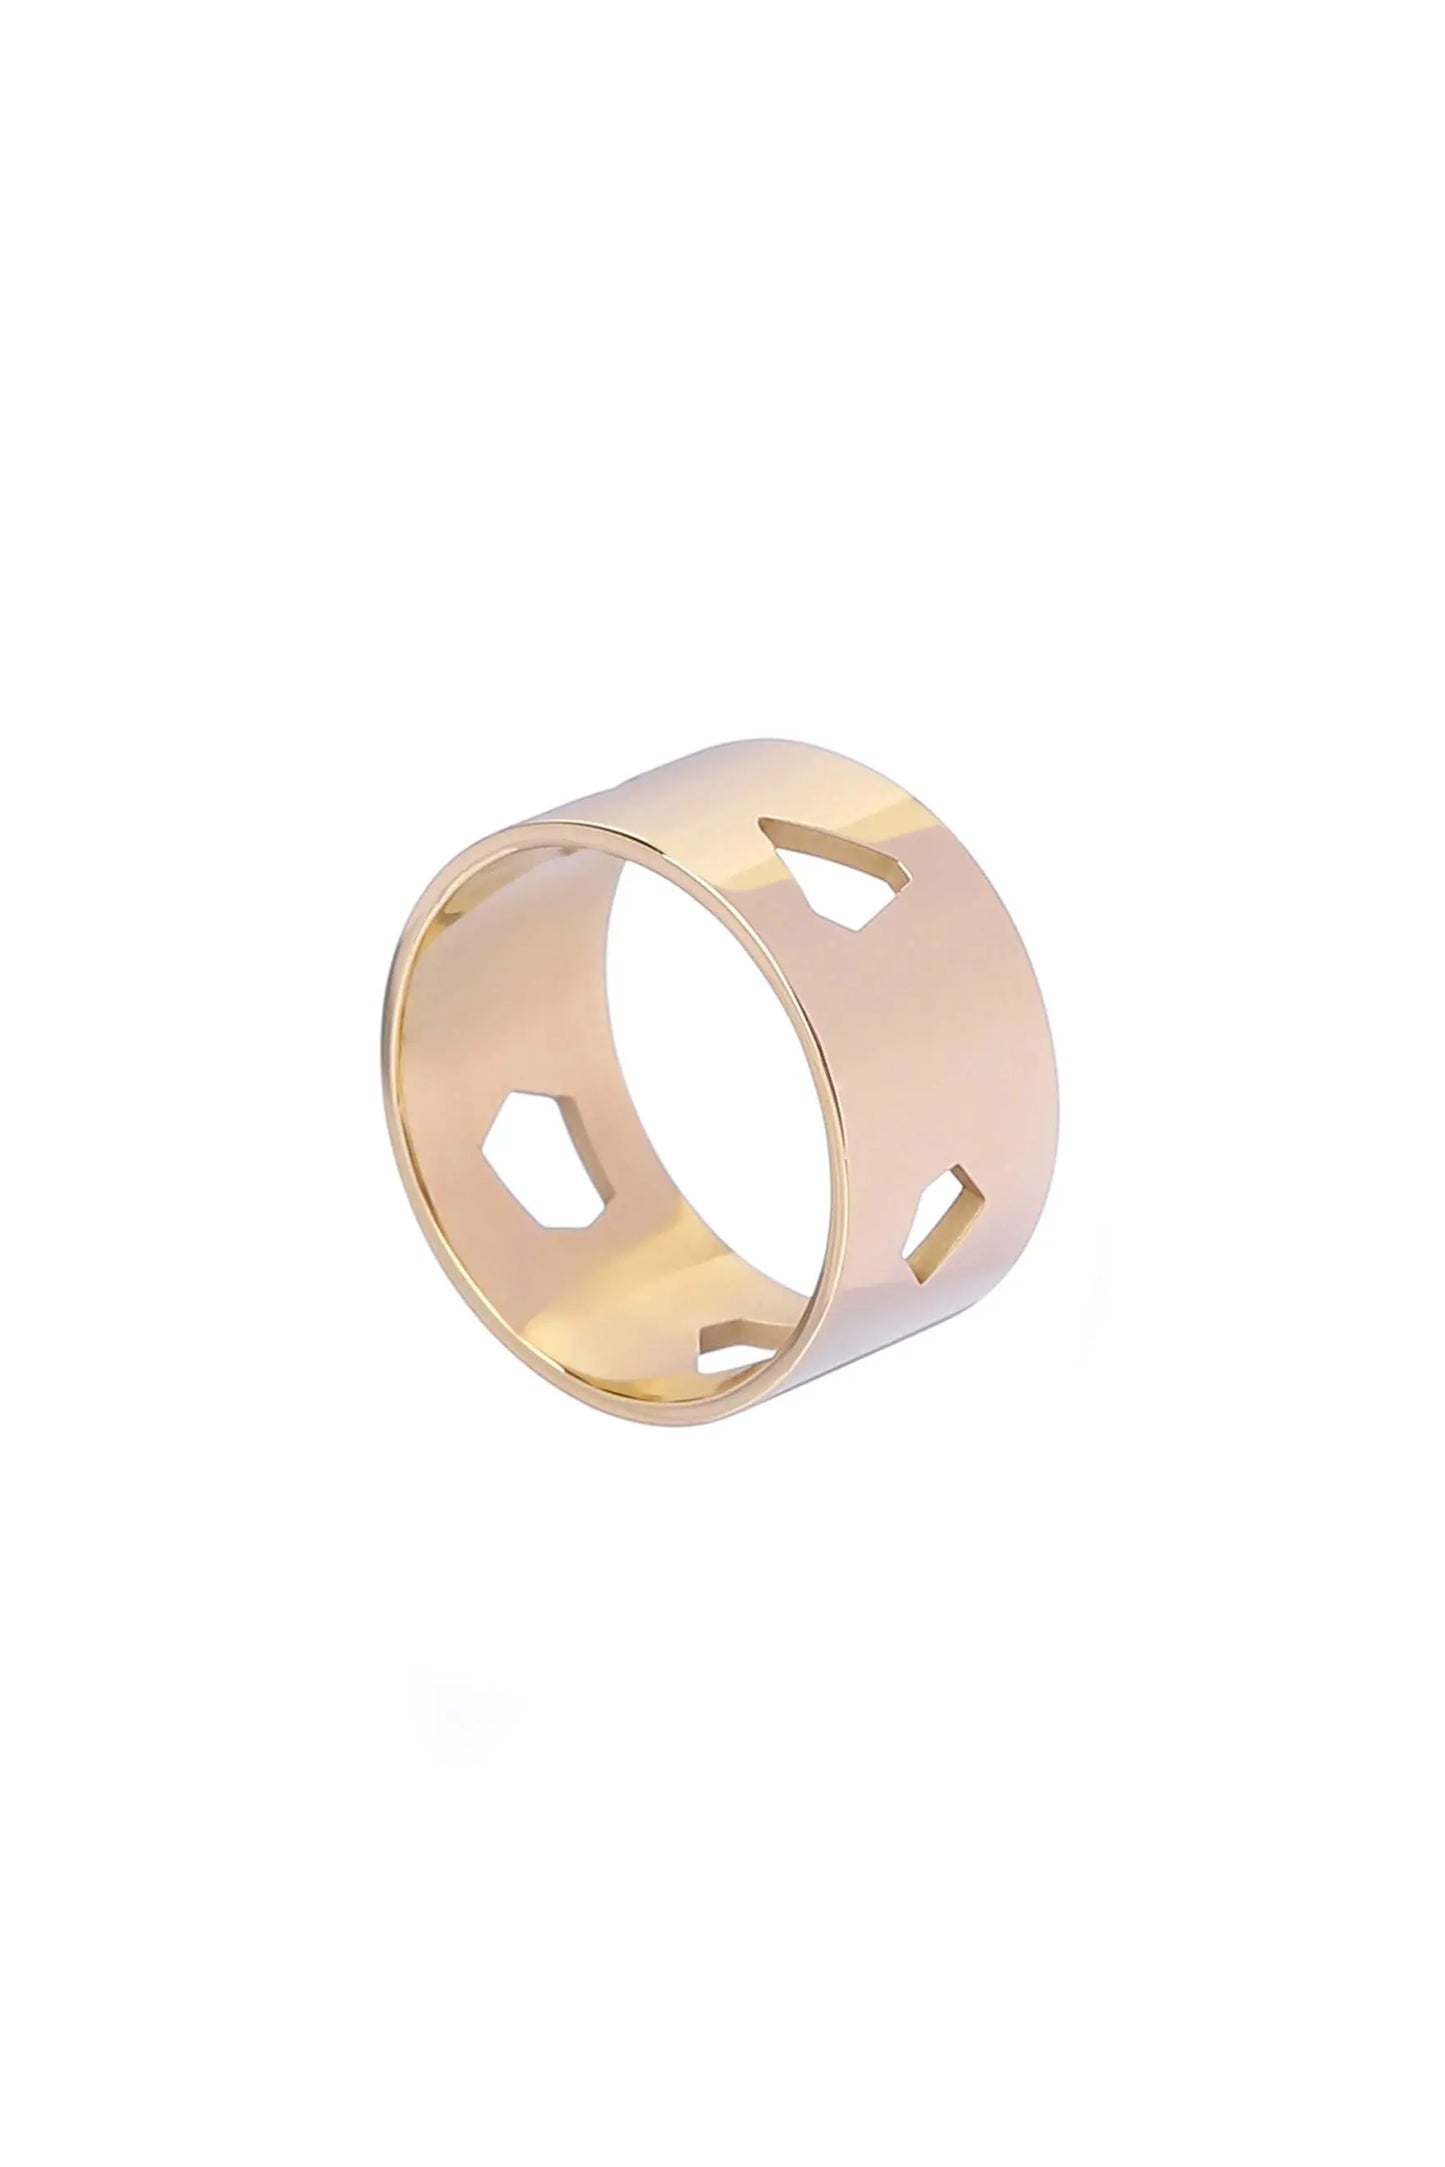 Voronoi void tall ring - CDD Jewelry